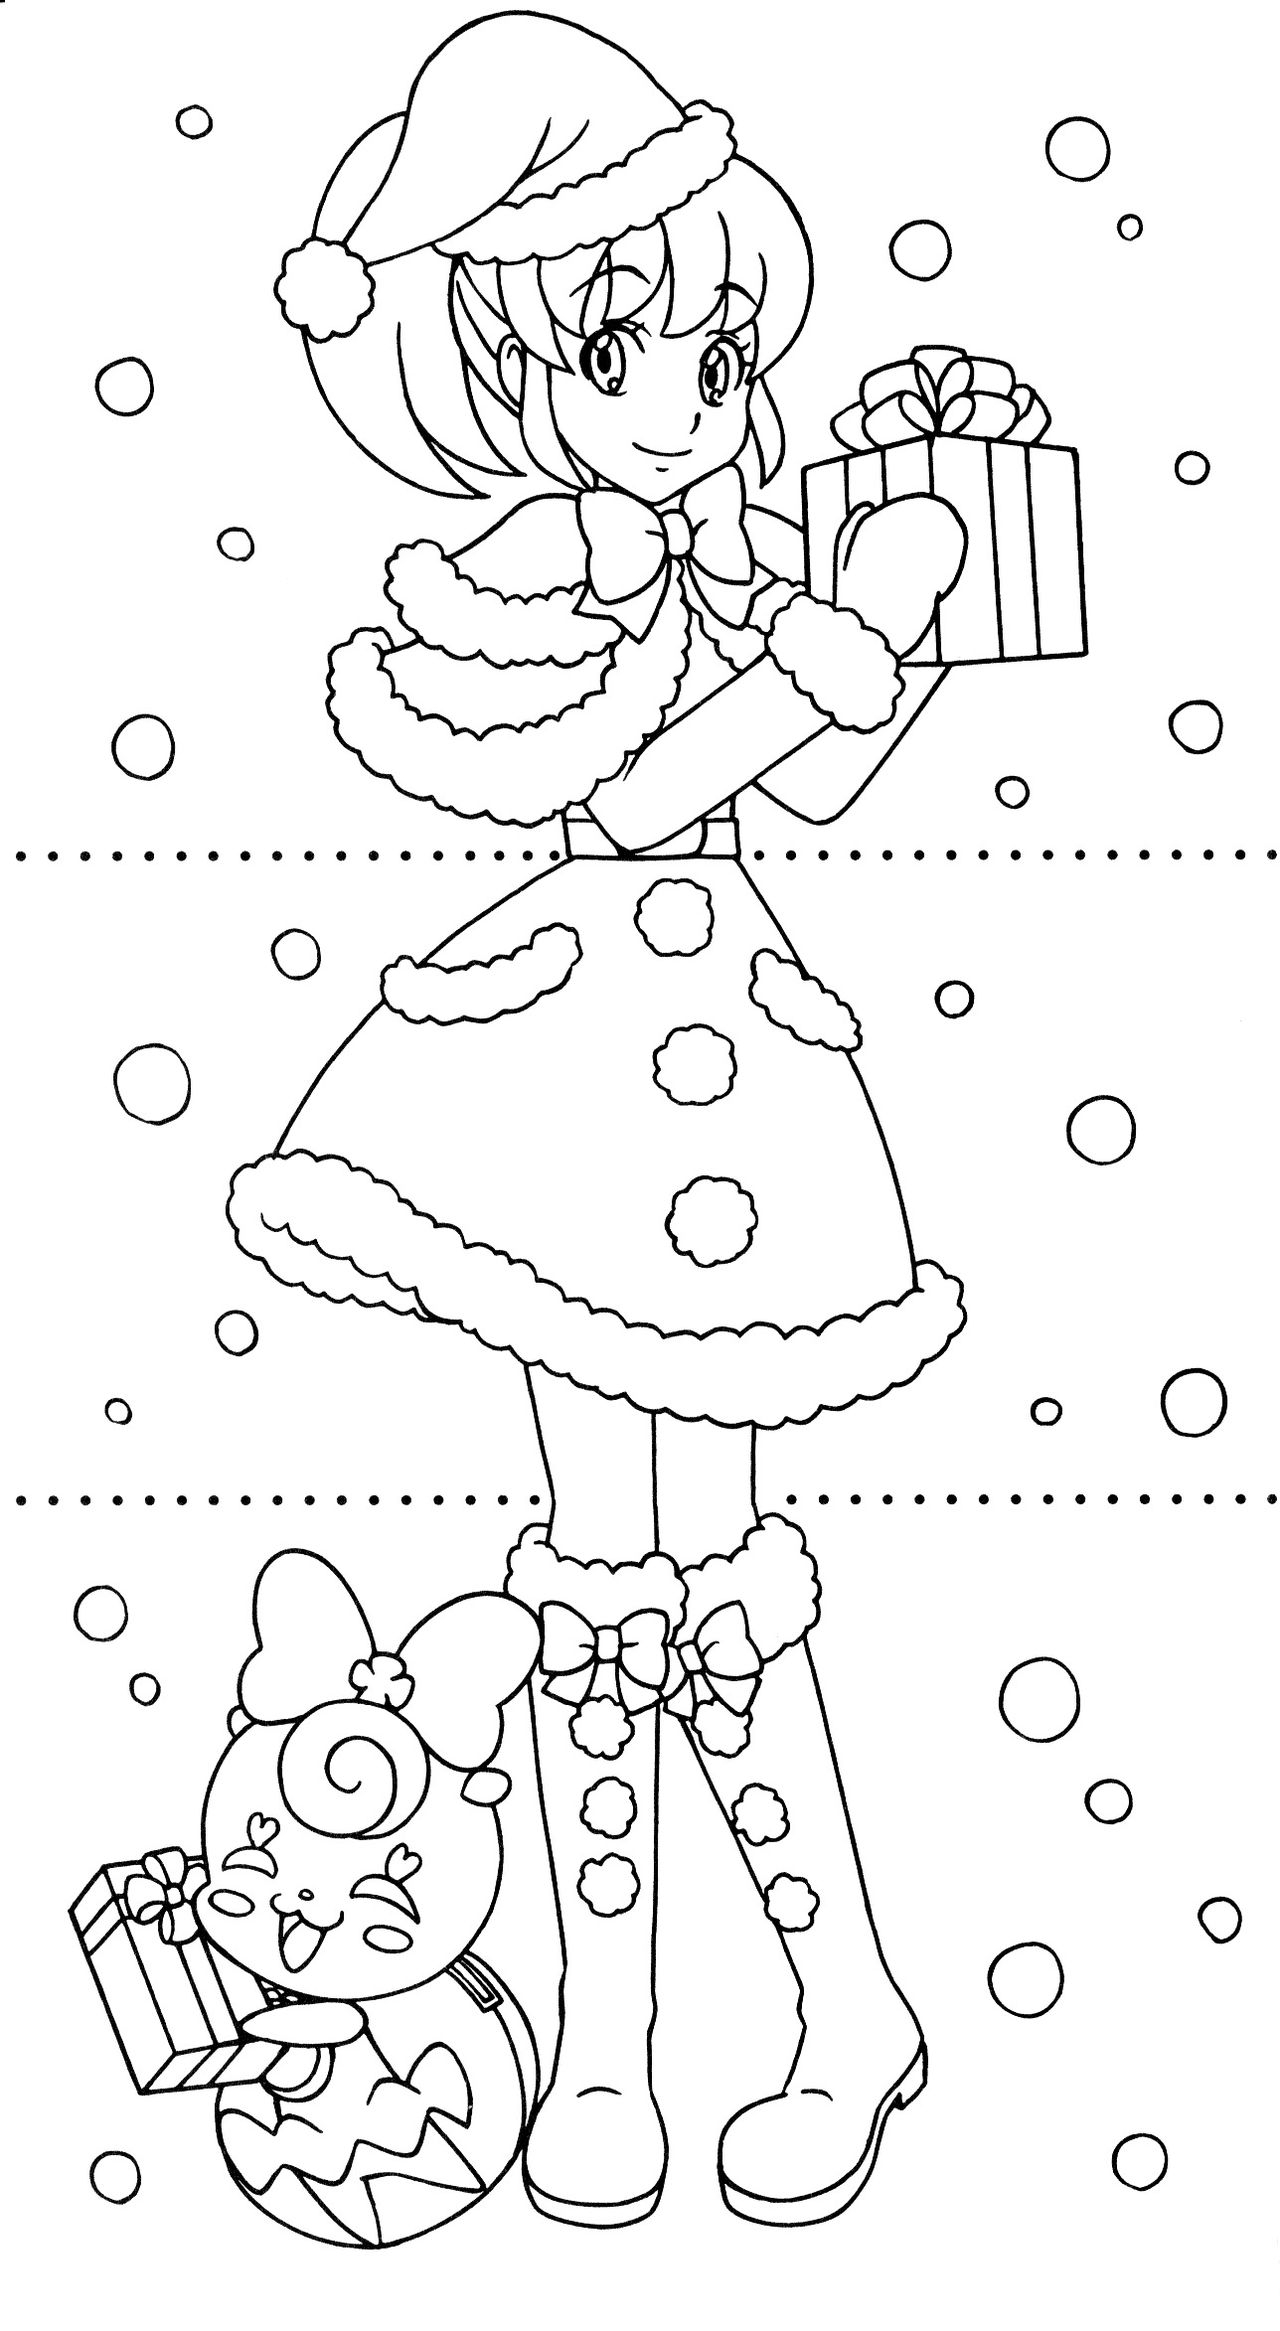 Happiness Charge Precure Dressup Coloring Book 22